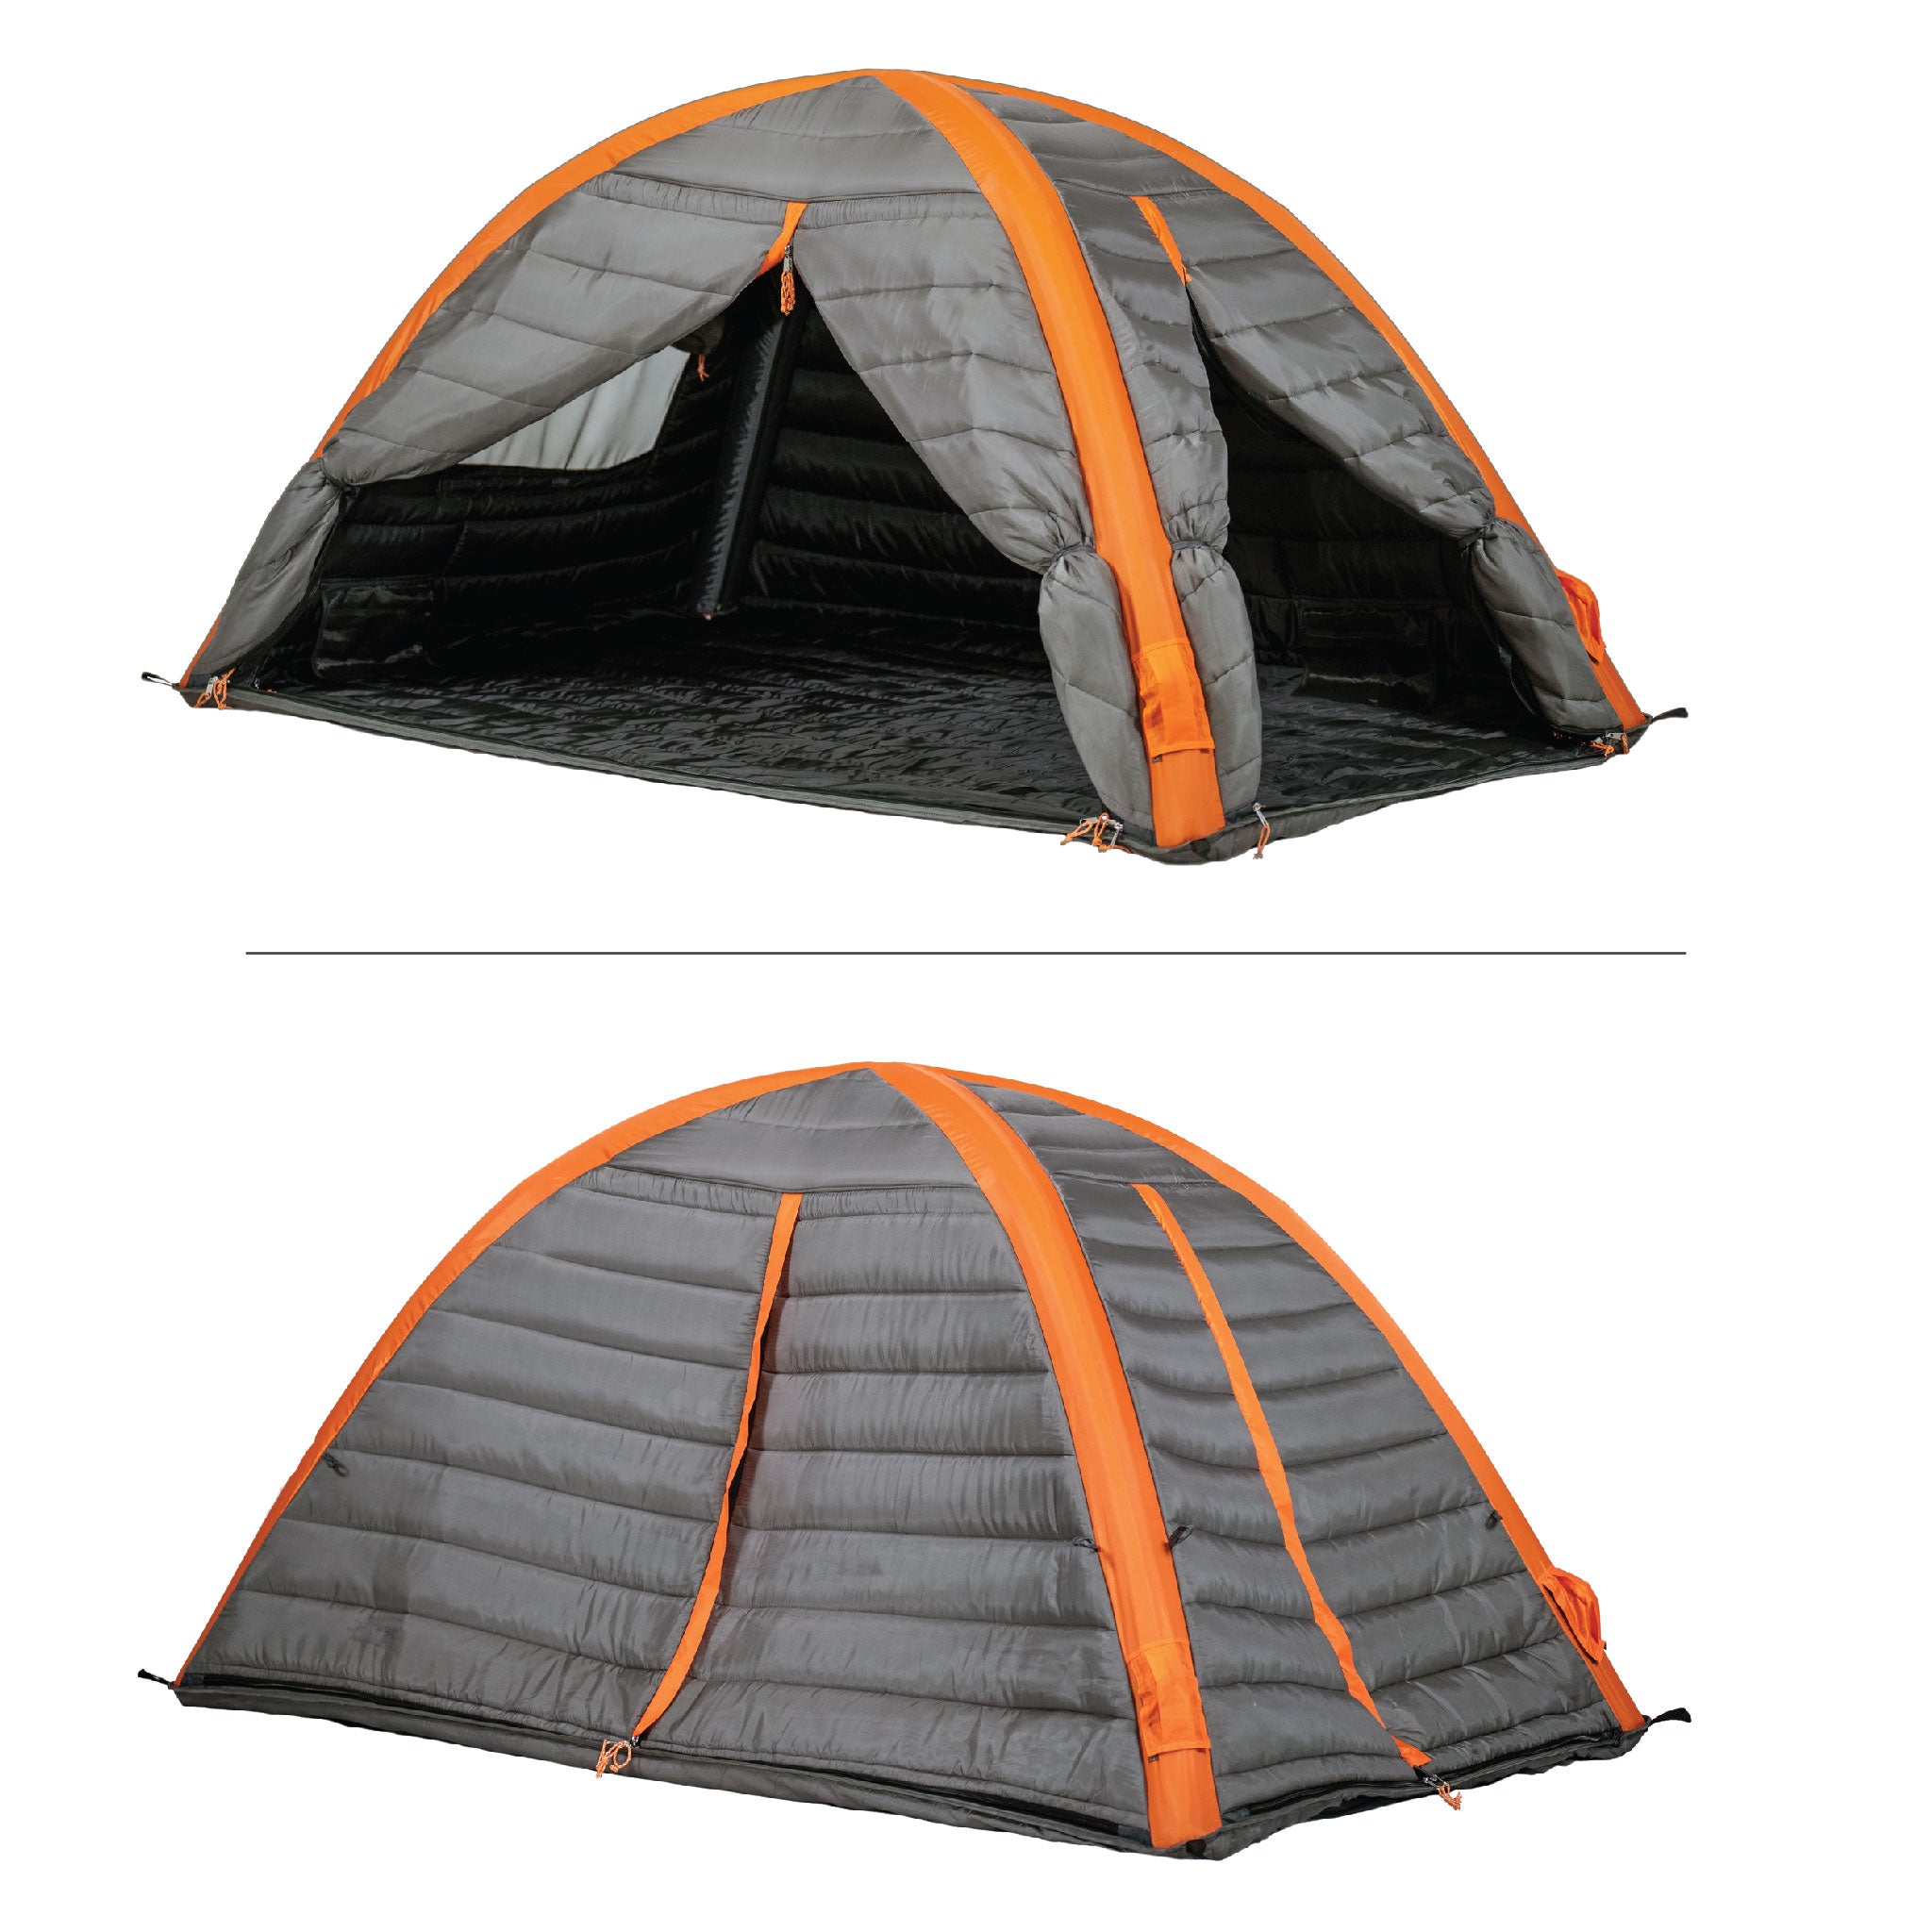 CULLA | 2 PERSON INSULATED INNER TENT WITH TEMPERATURE REGULATING, NOISE DAMPENING AND LIGHT BLOCKING FEATURES